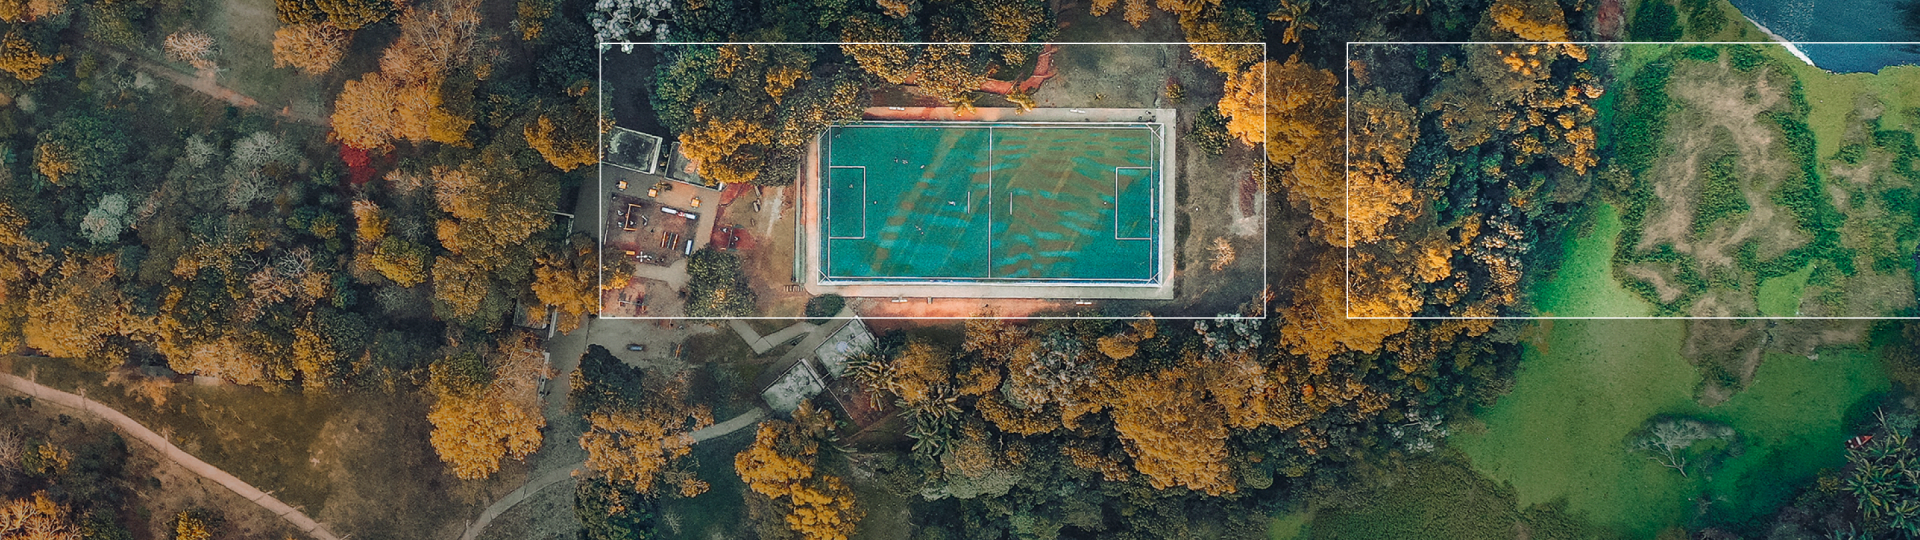 A birds eye view of a football pitch in a woodland.